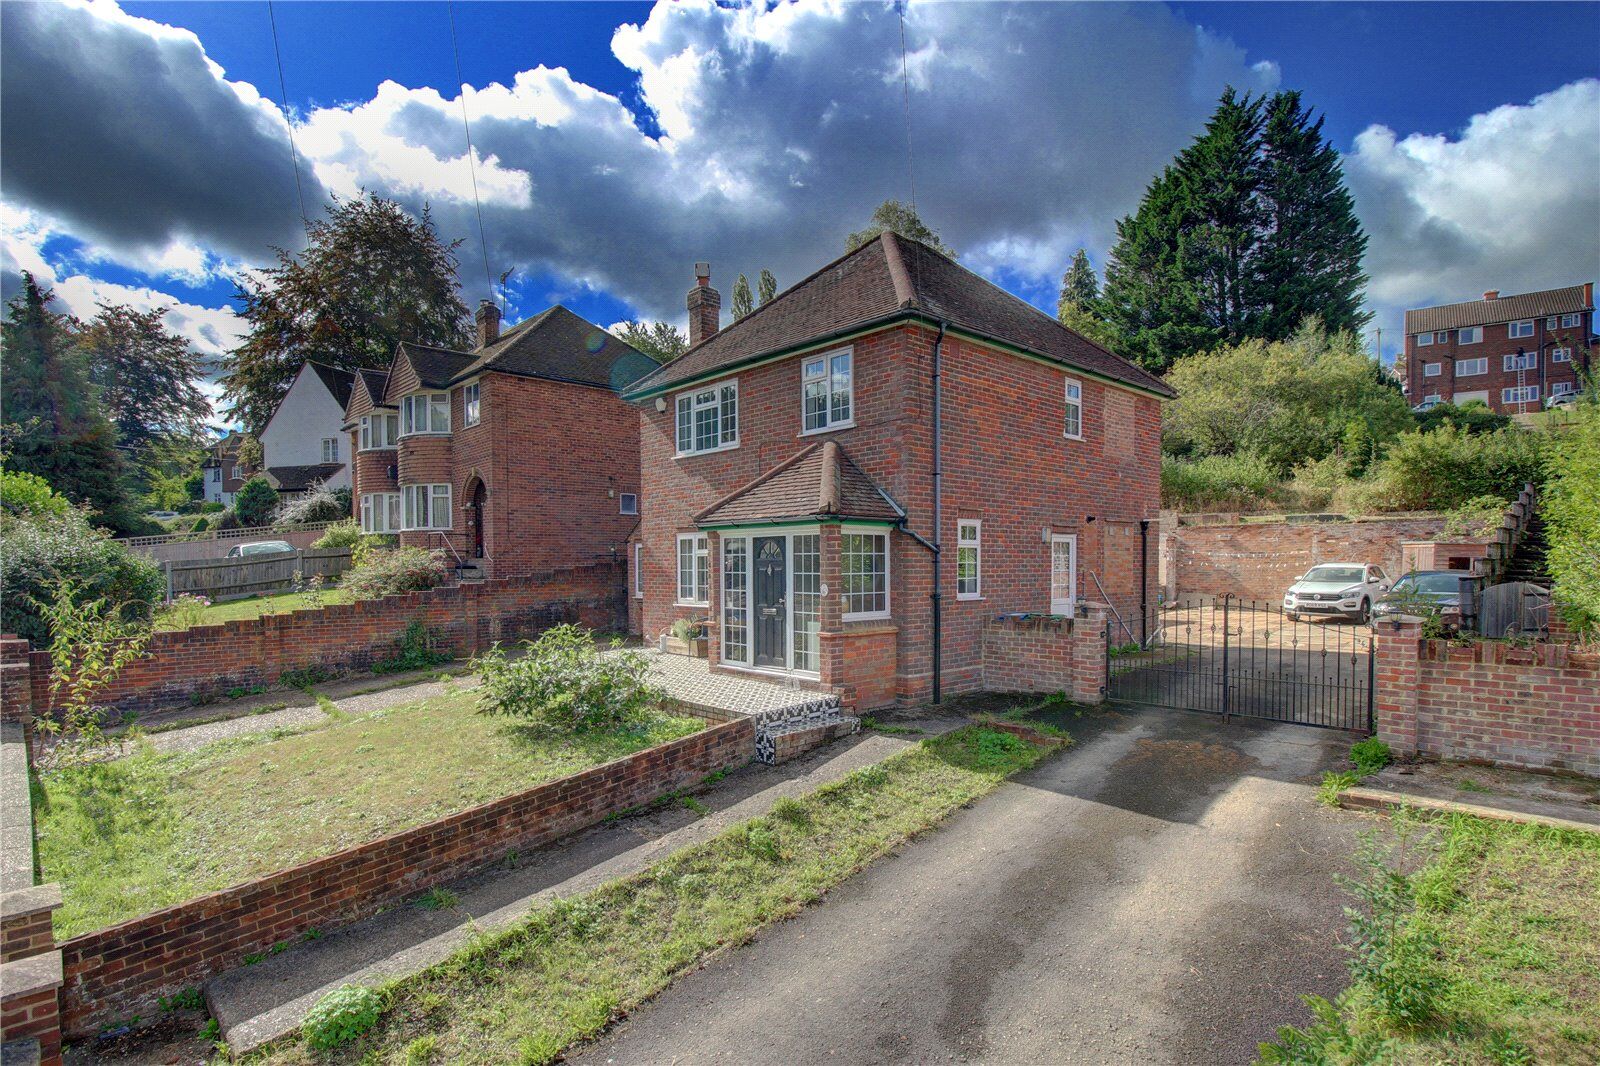 3 bedroom detached house for sale Desborough Avenue, High Wycombe, HP11, main image